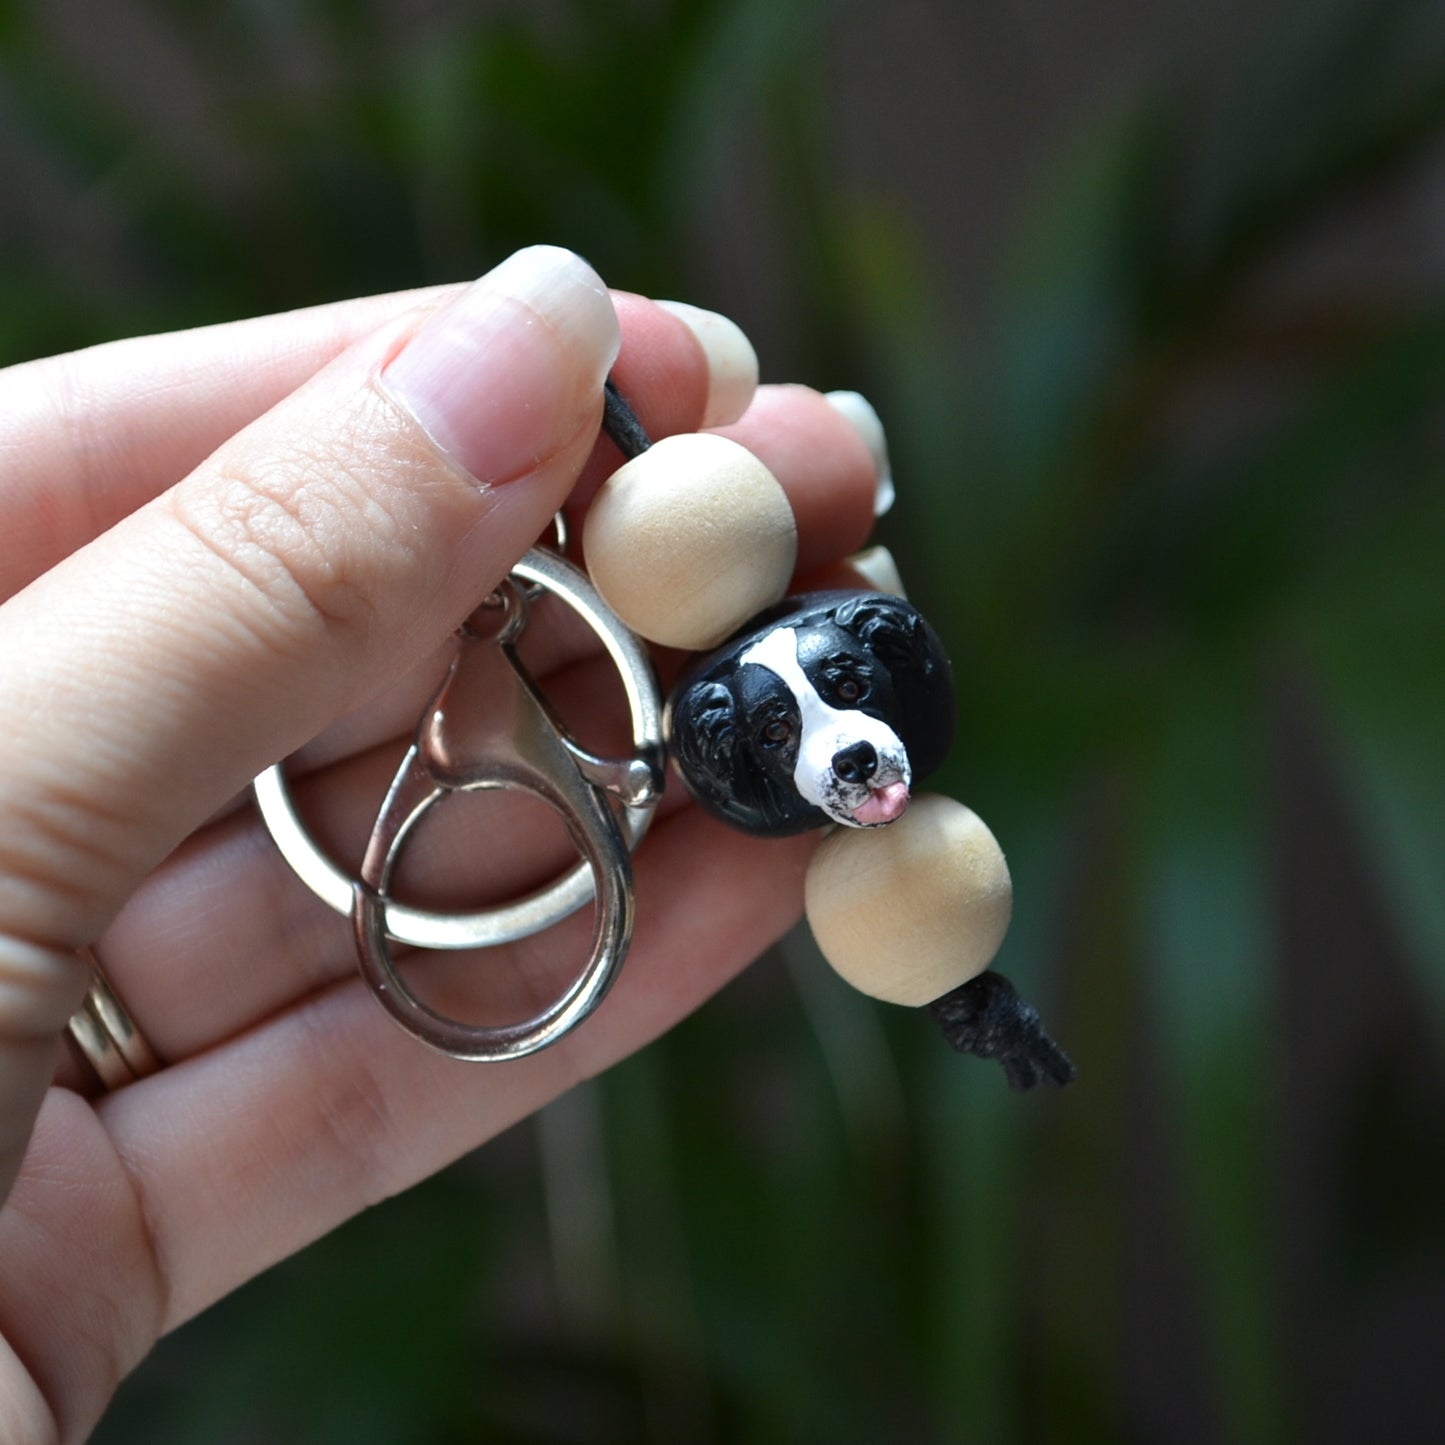 Handmade timber and polymer clay border collie dog keychain